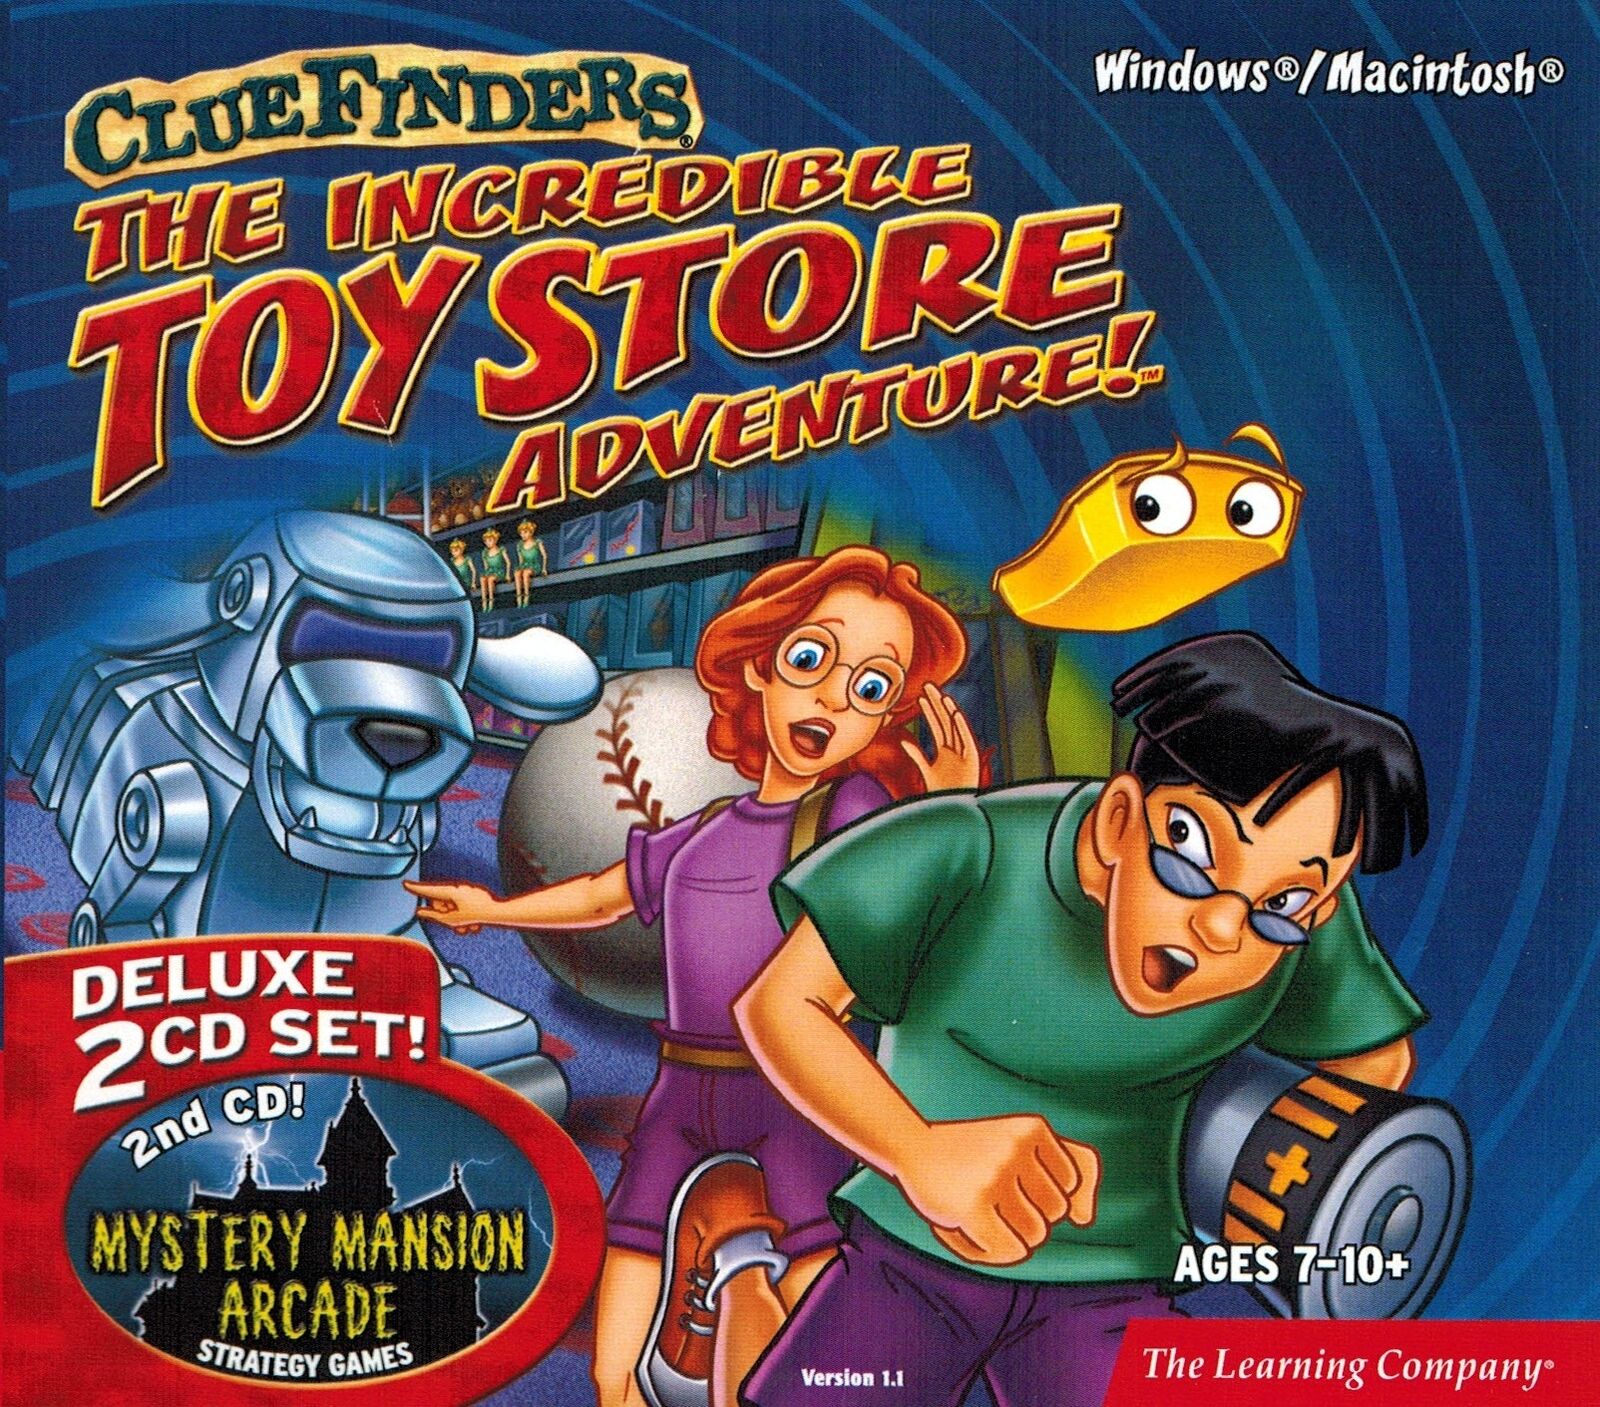 Cluefinders Incredible Toy Store Adventure Mystery Mansion Ages 7-10+ New Sealed